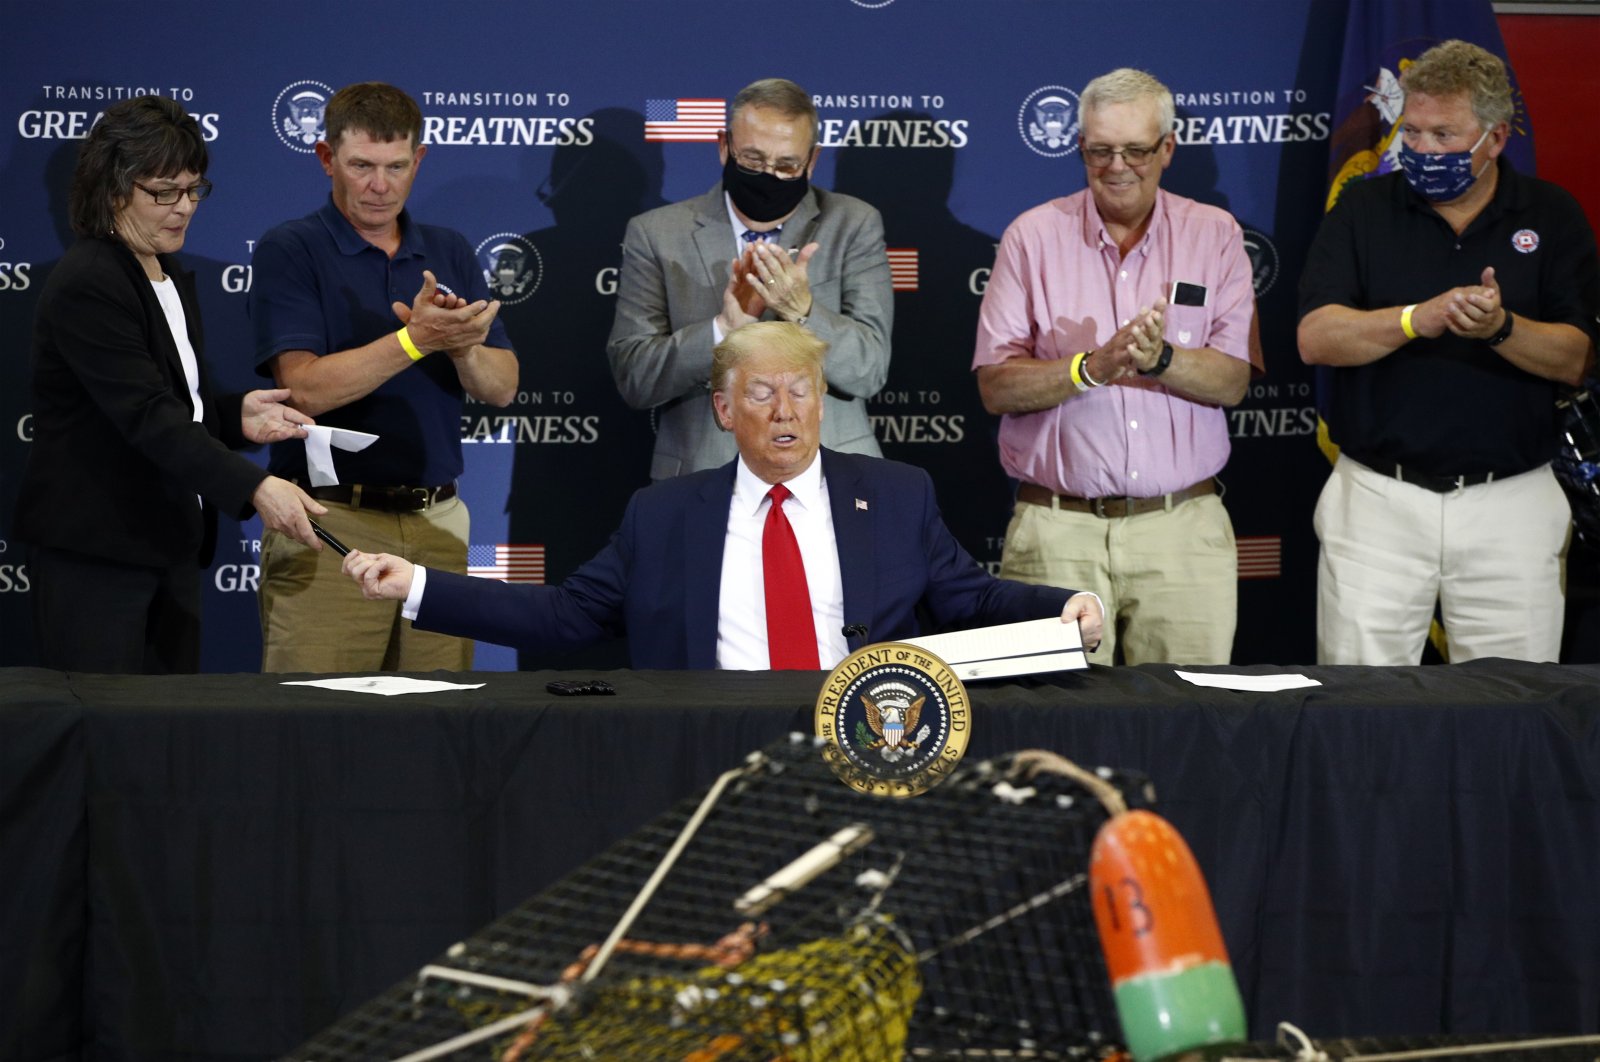 President Donald Trump hands pens out after signing an executive order on commercial fishing after speaking at a roundtable discussion with commercial fishermen at Bangor International Airport in Bangor, Maine, June 5, 2020. (AP Photo)